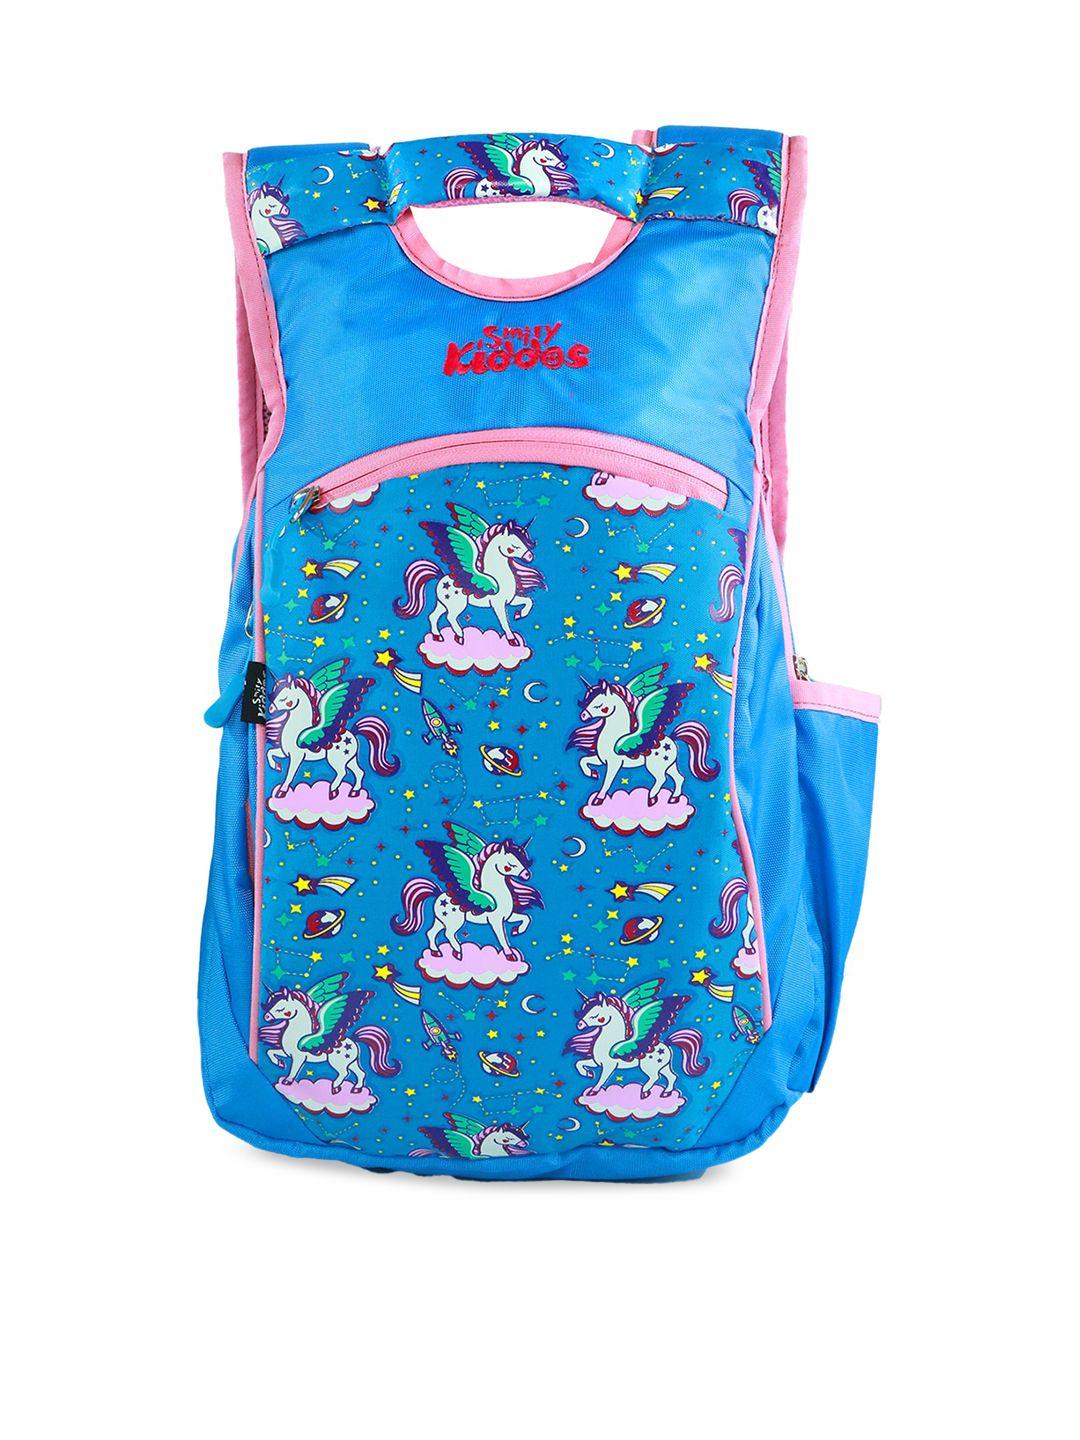 smily kiddos kids blue & pink graphic polyester backpack with anti-theft